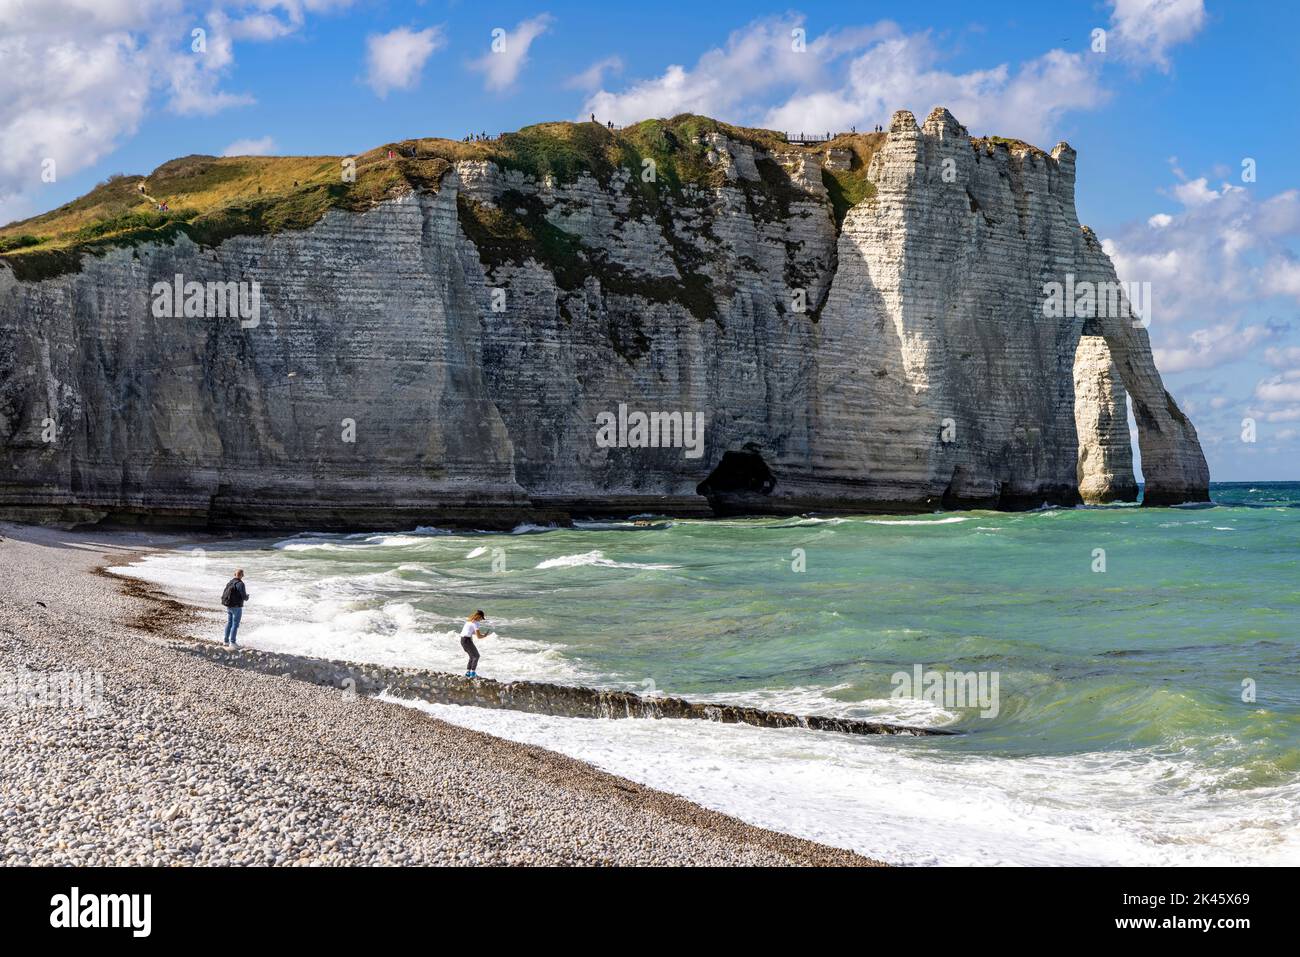 The scenic coastline of Etretat famous for its Alabaster cliffs, Seine-Maritime, Normandy, France. Stock Photo